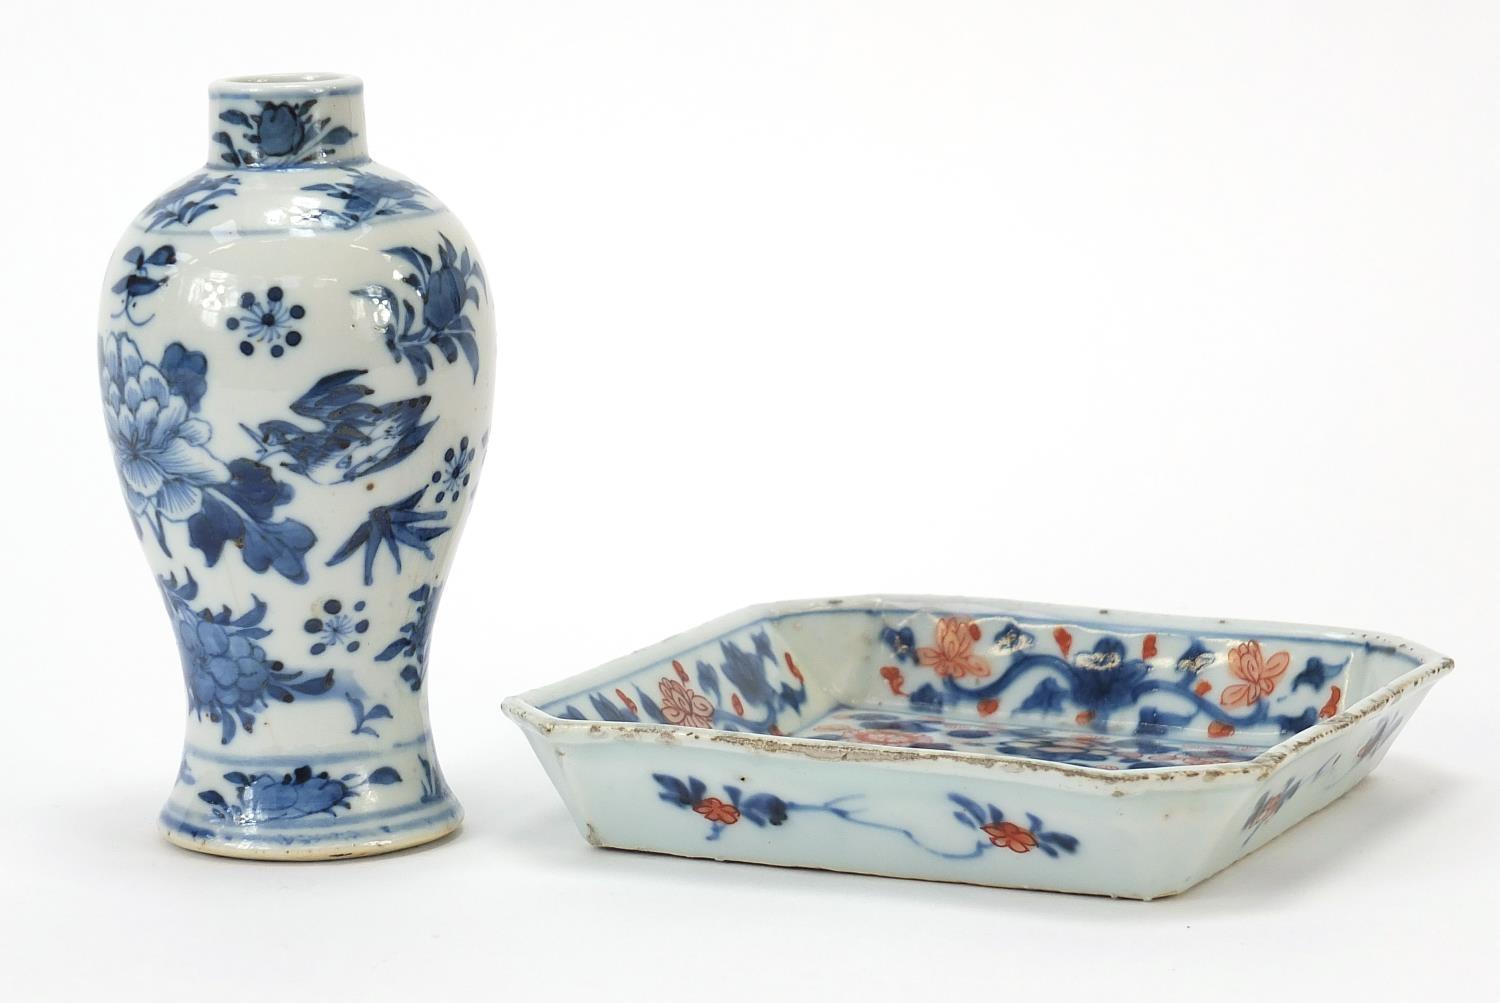 Chinese blue and white porcelain baluster vase and a square dish hand painted in the Imari palette - Image 5 of 8